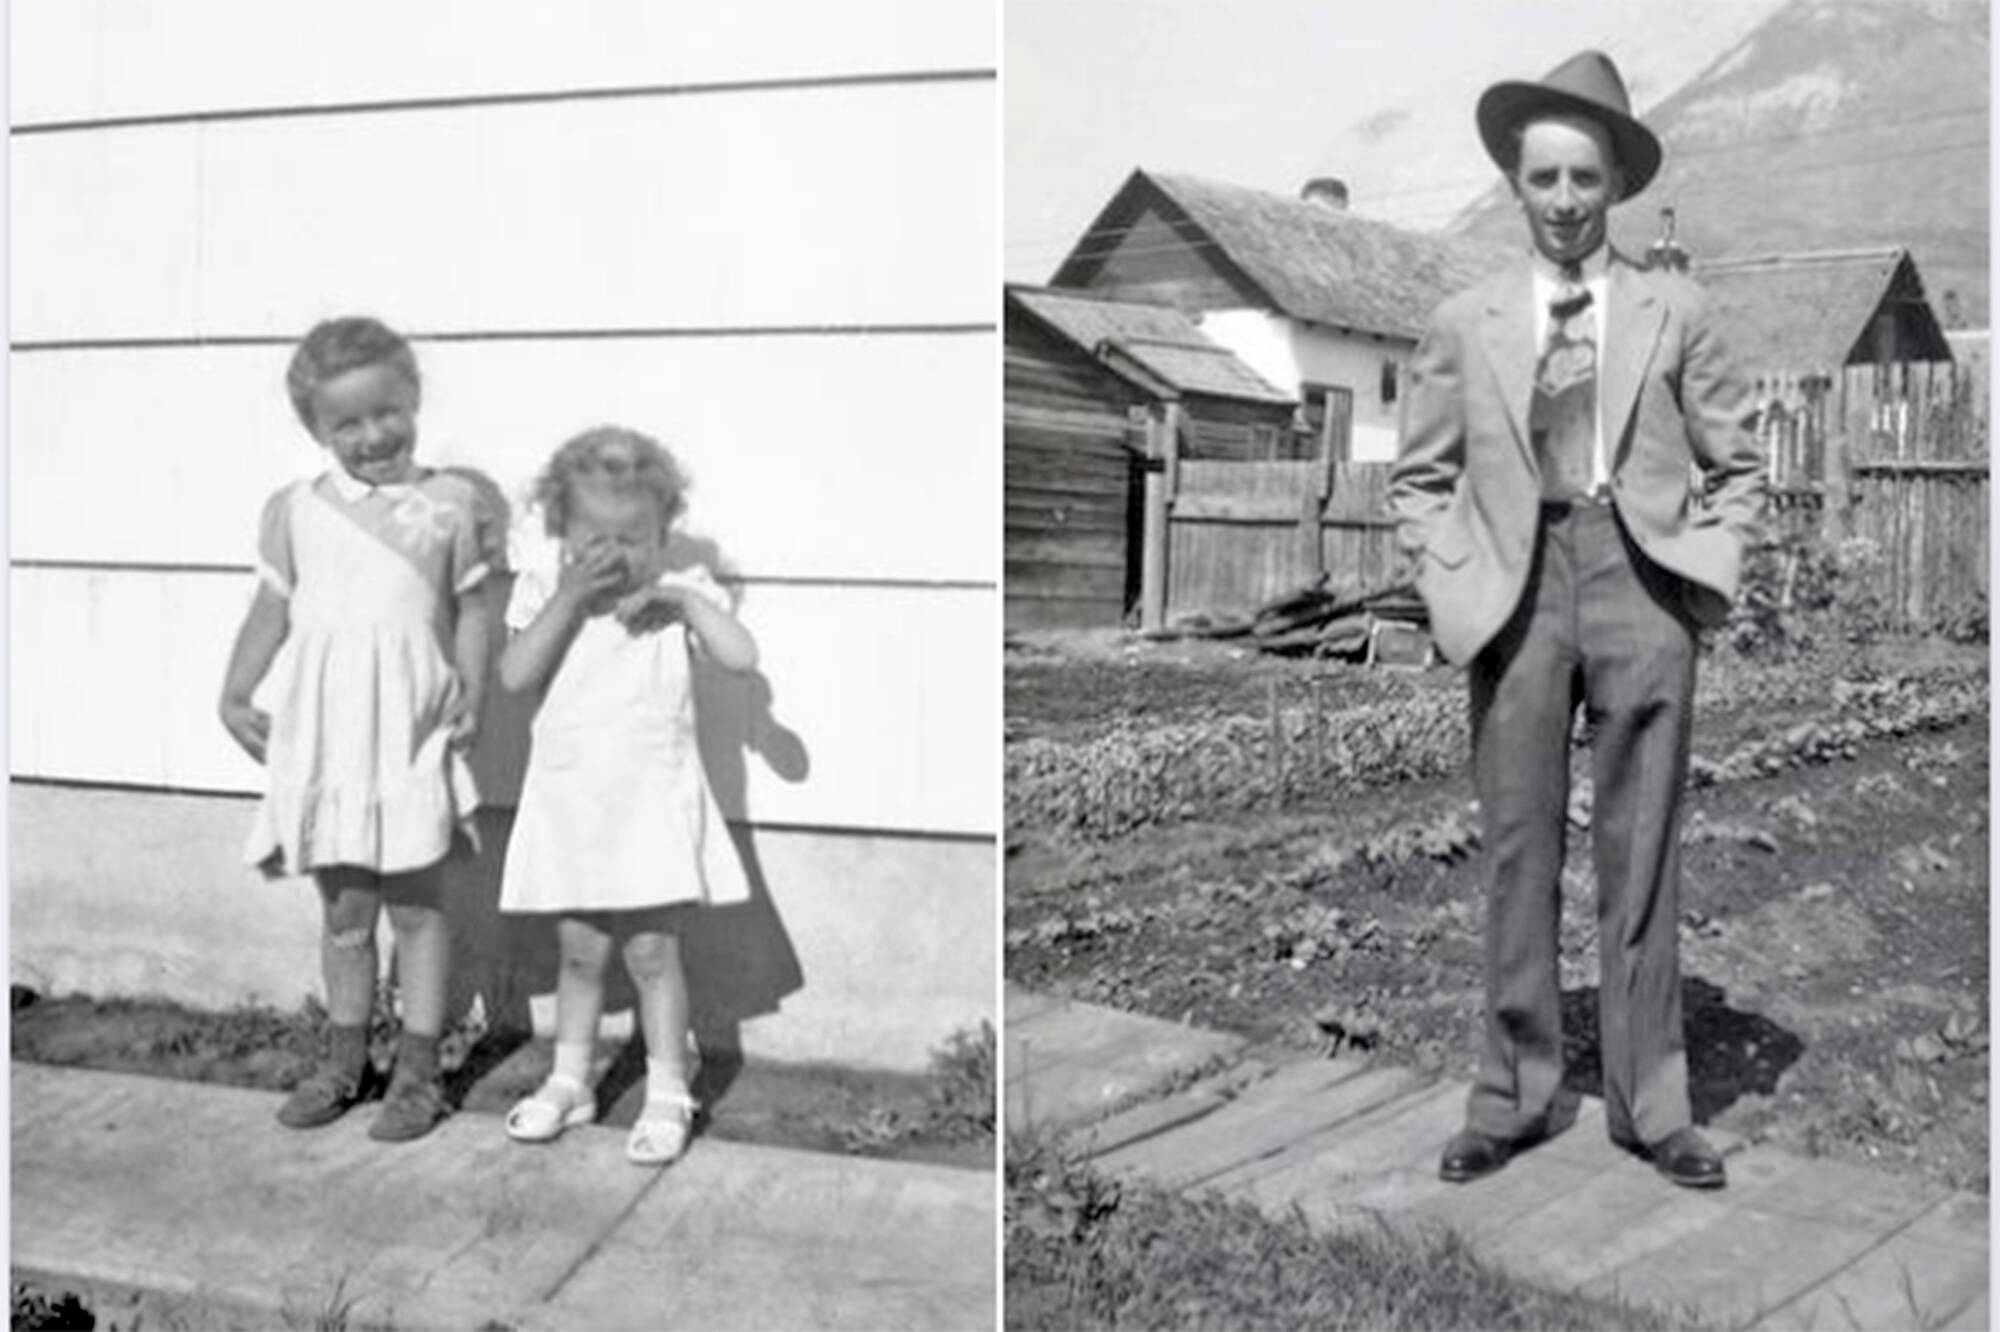 Pictured are cropped scans of two photo negatives found hidden inside a 1991 Cadillac DeVille recently purchased from a scrapyard by the son of Calgary resident Gudren Ebbinghoff. (Contributed)